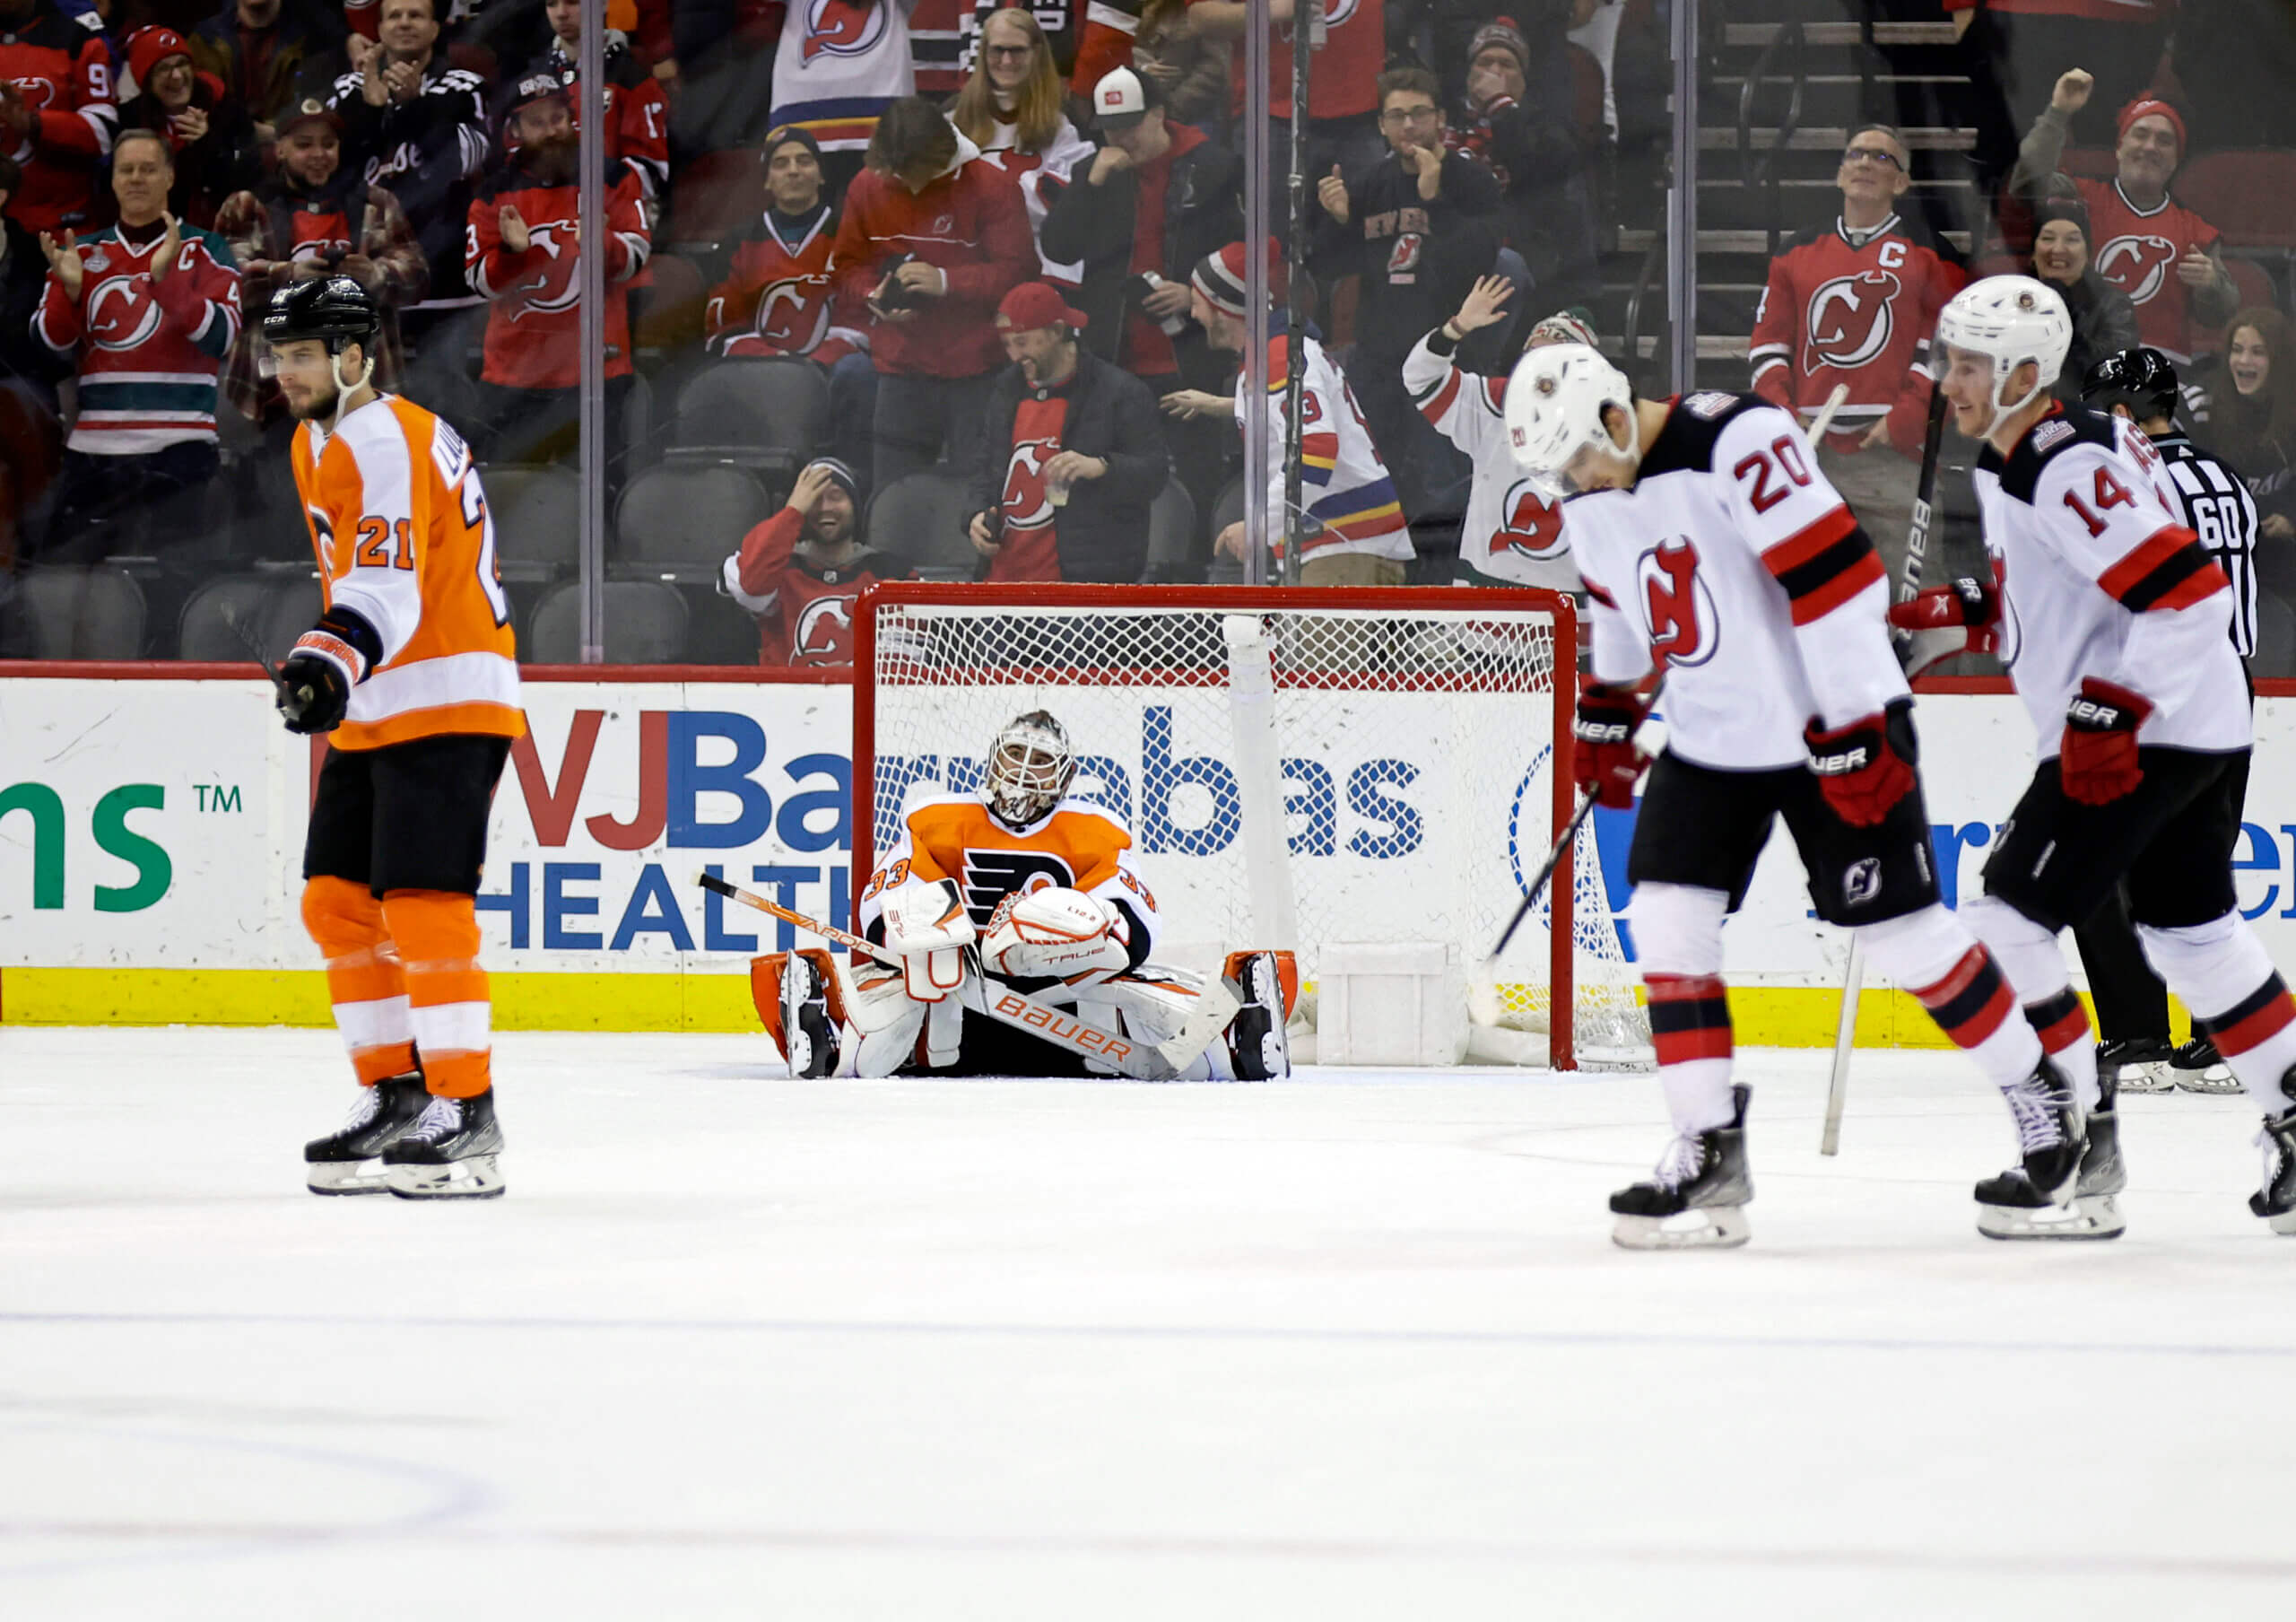 How New Jersey Devils Can Make Prudential Center More Intimidating